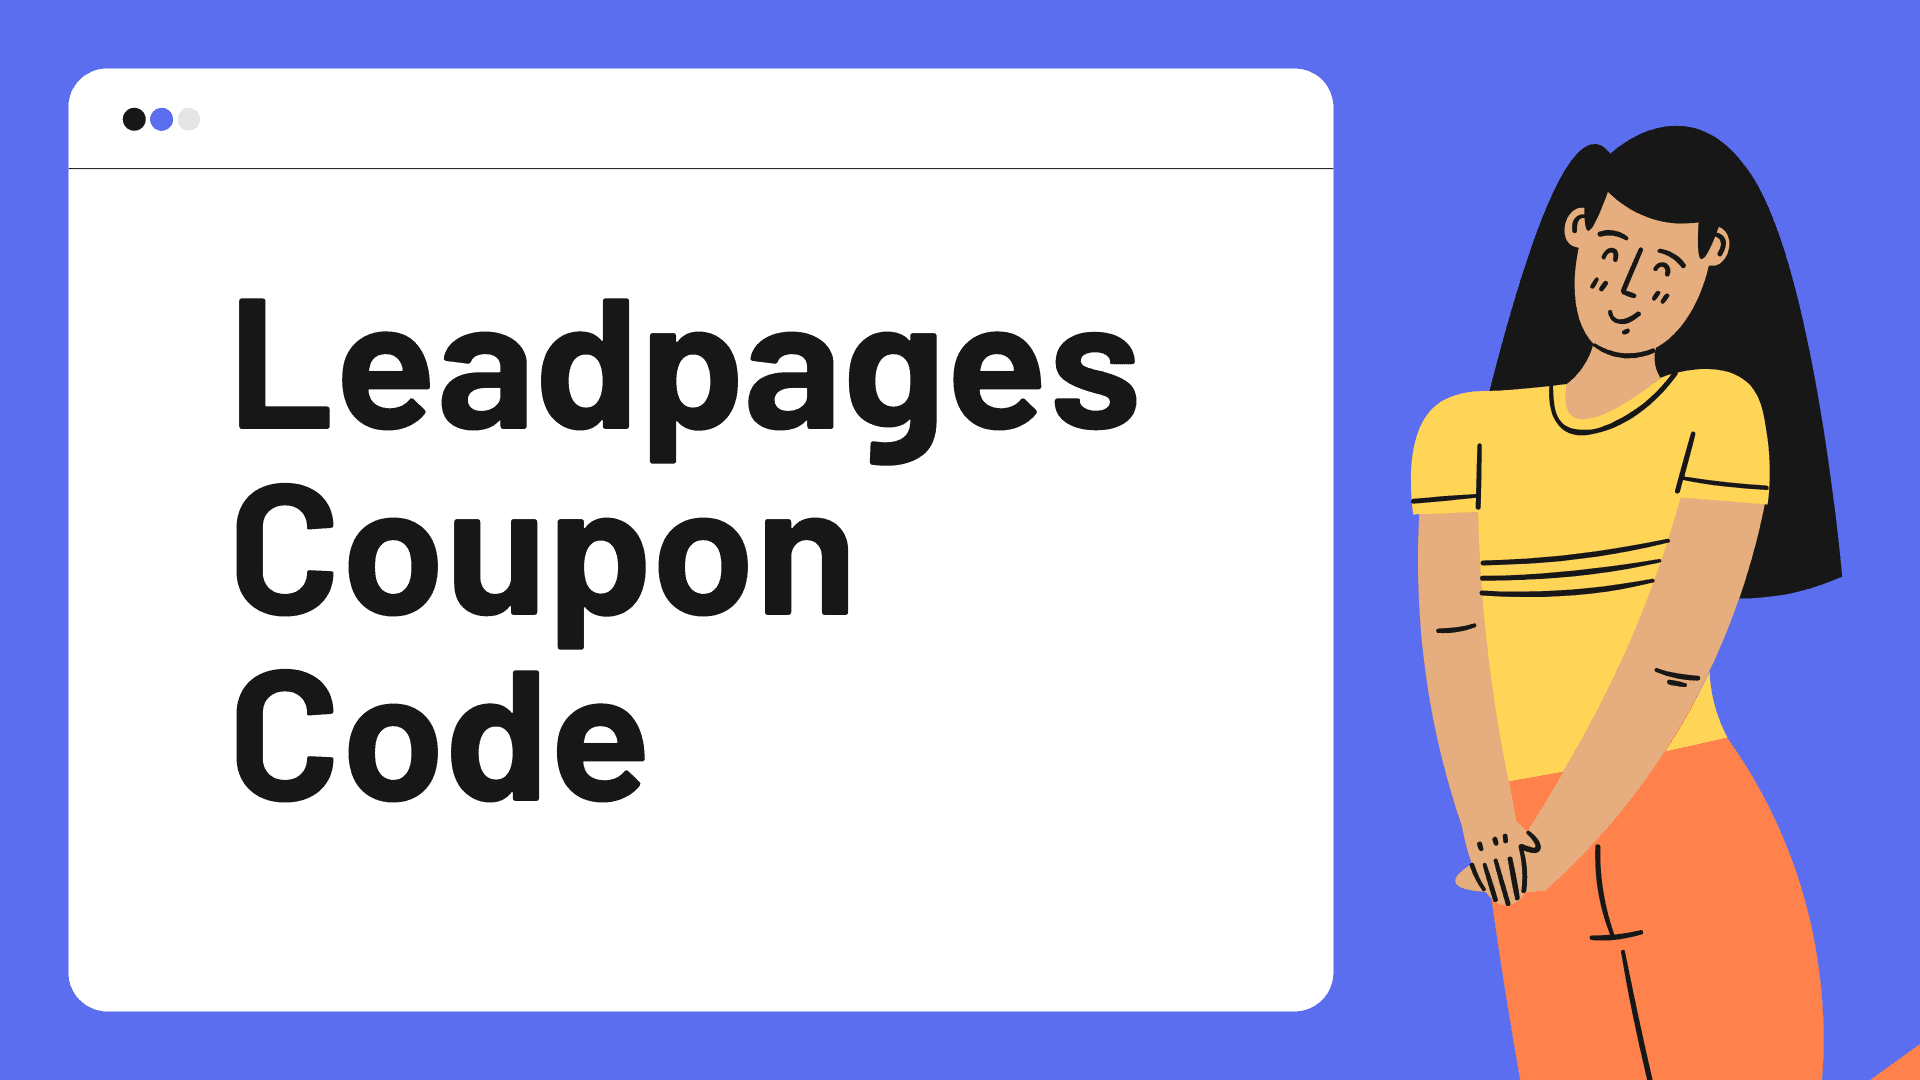 Leadpages Coupon Code